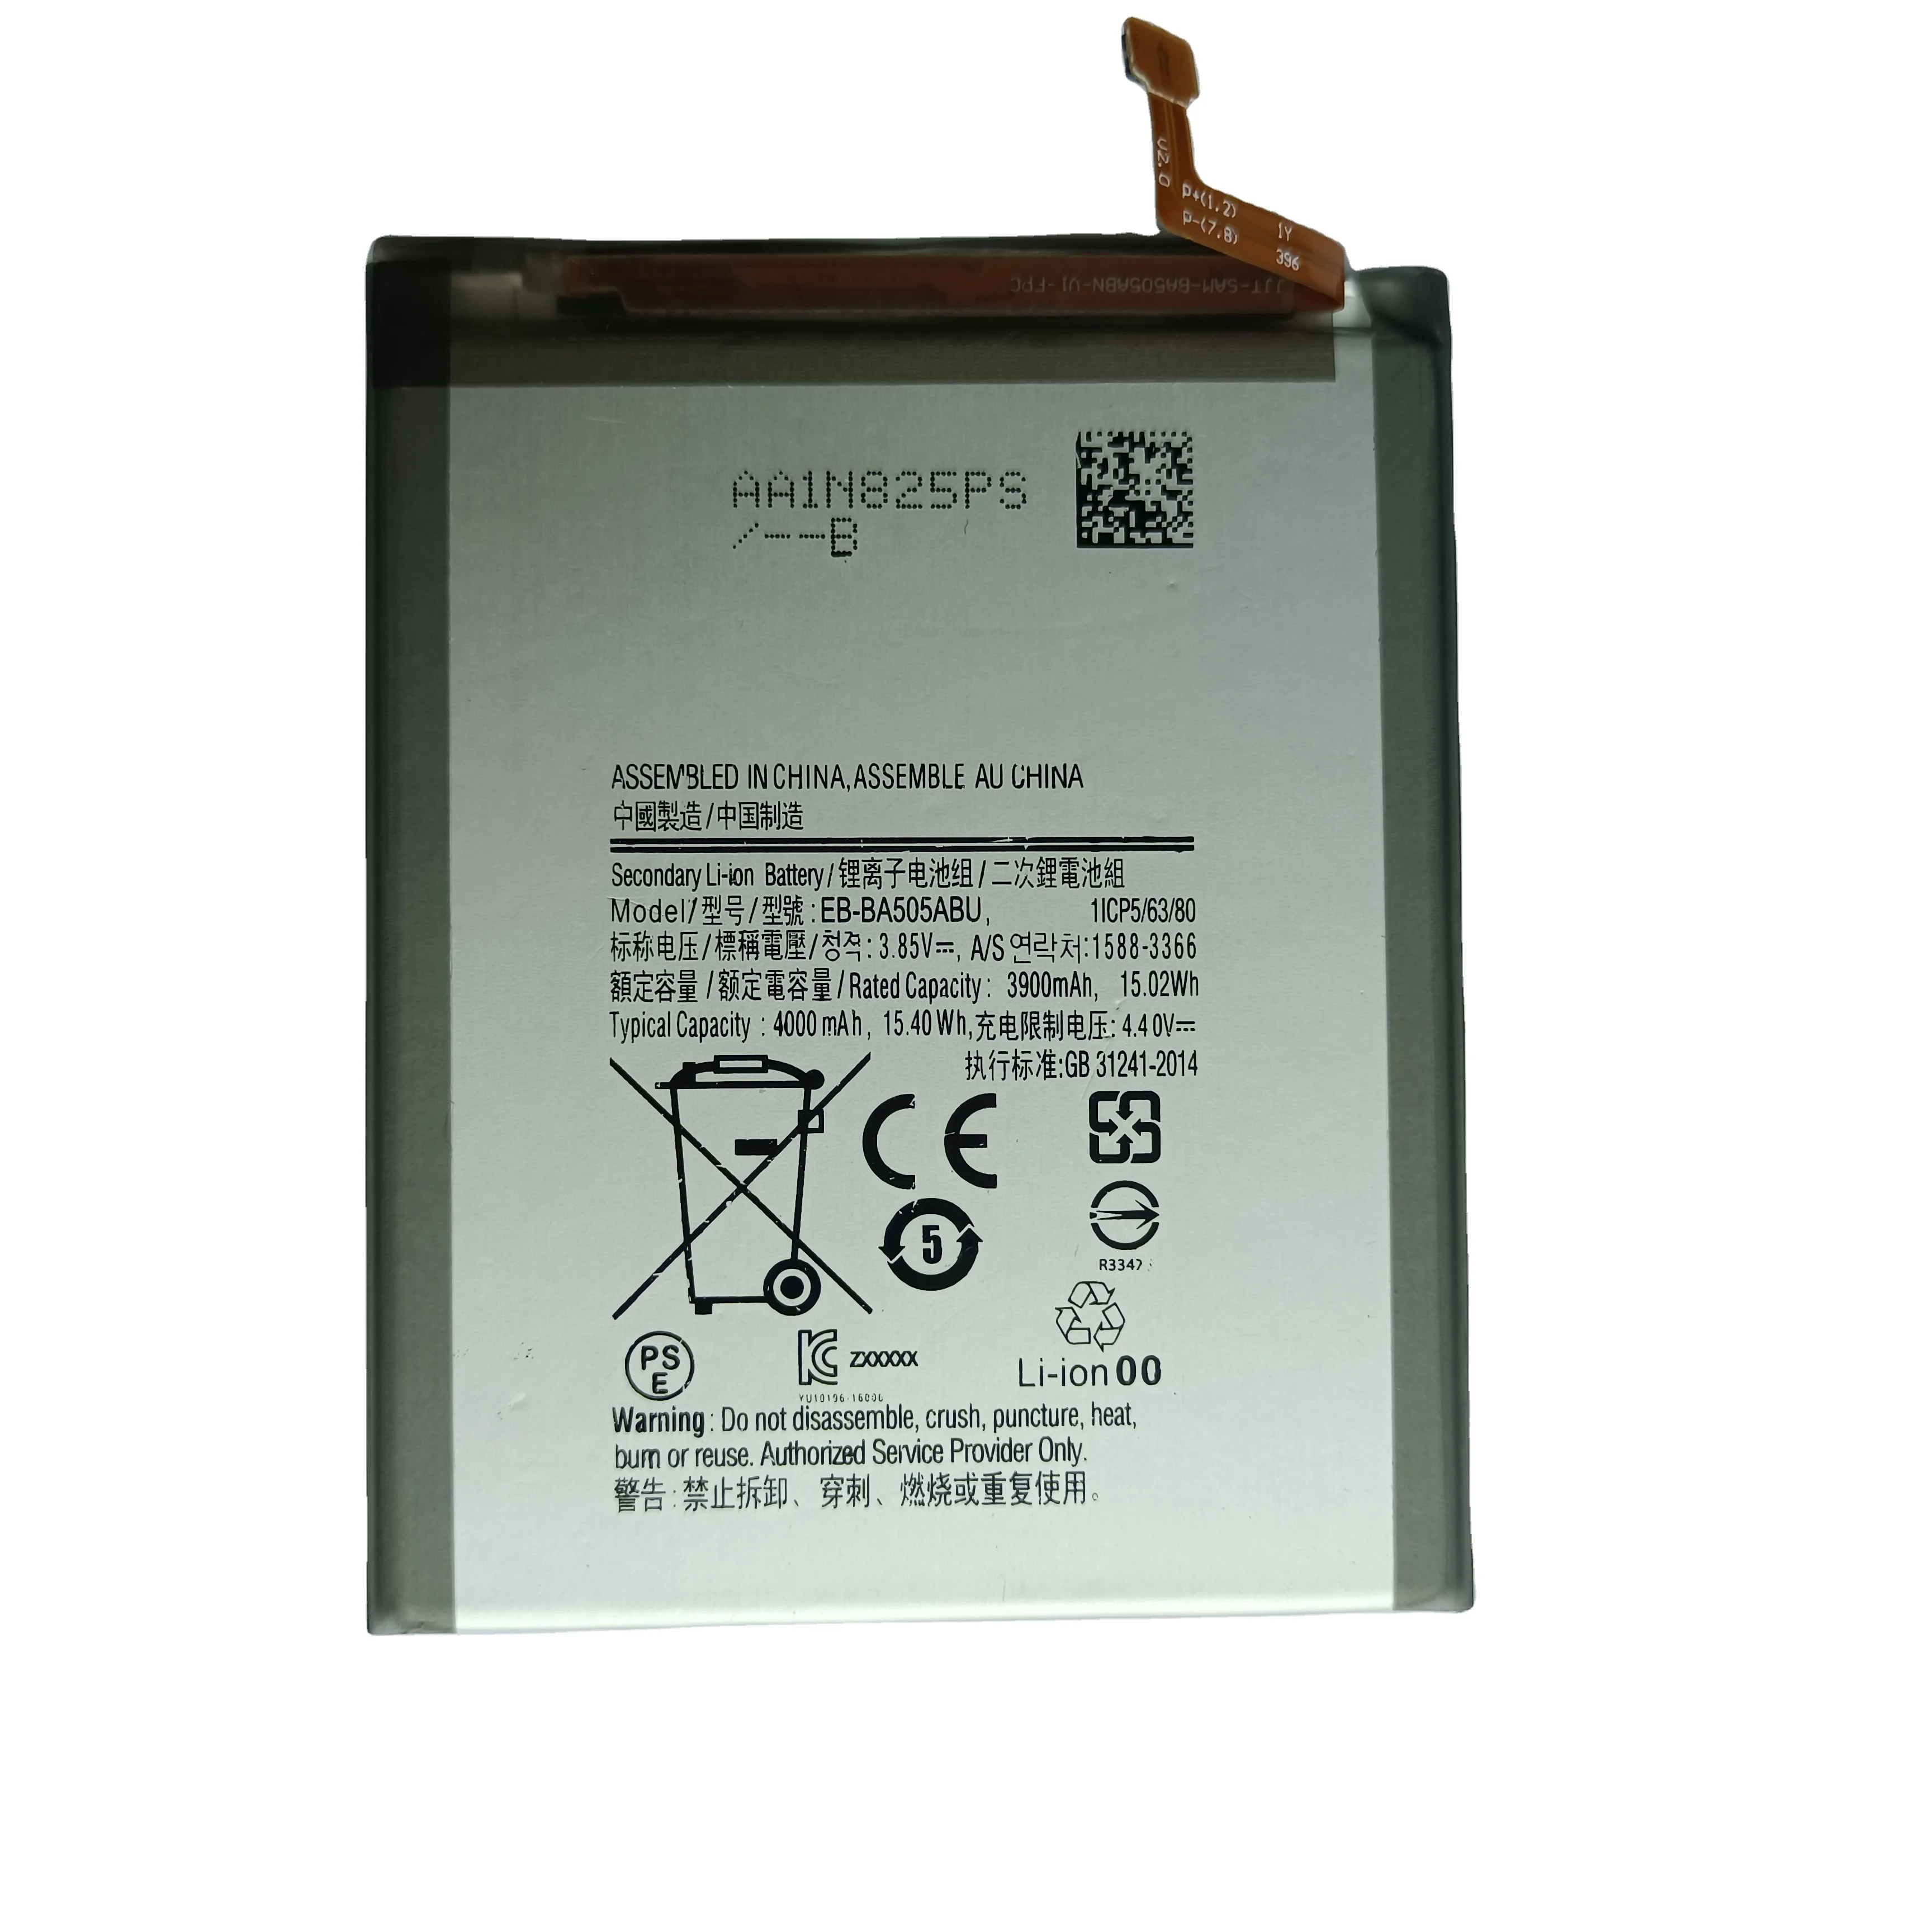 

Original big capacity digital BATTERY EB-BA505ABU rechargeable lithium ion Mobile phones batteries for Samsung a20 a30 a50